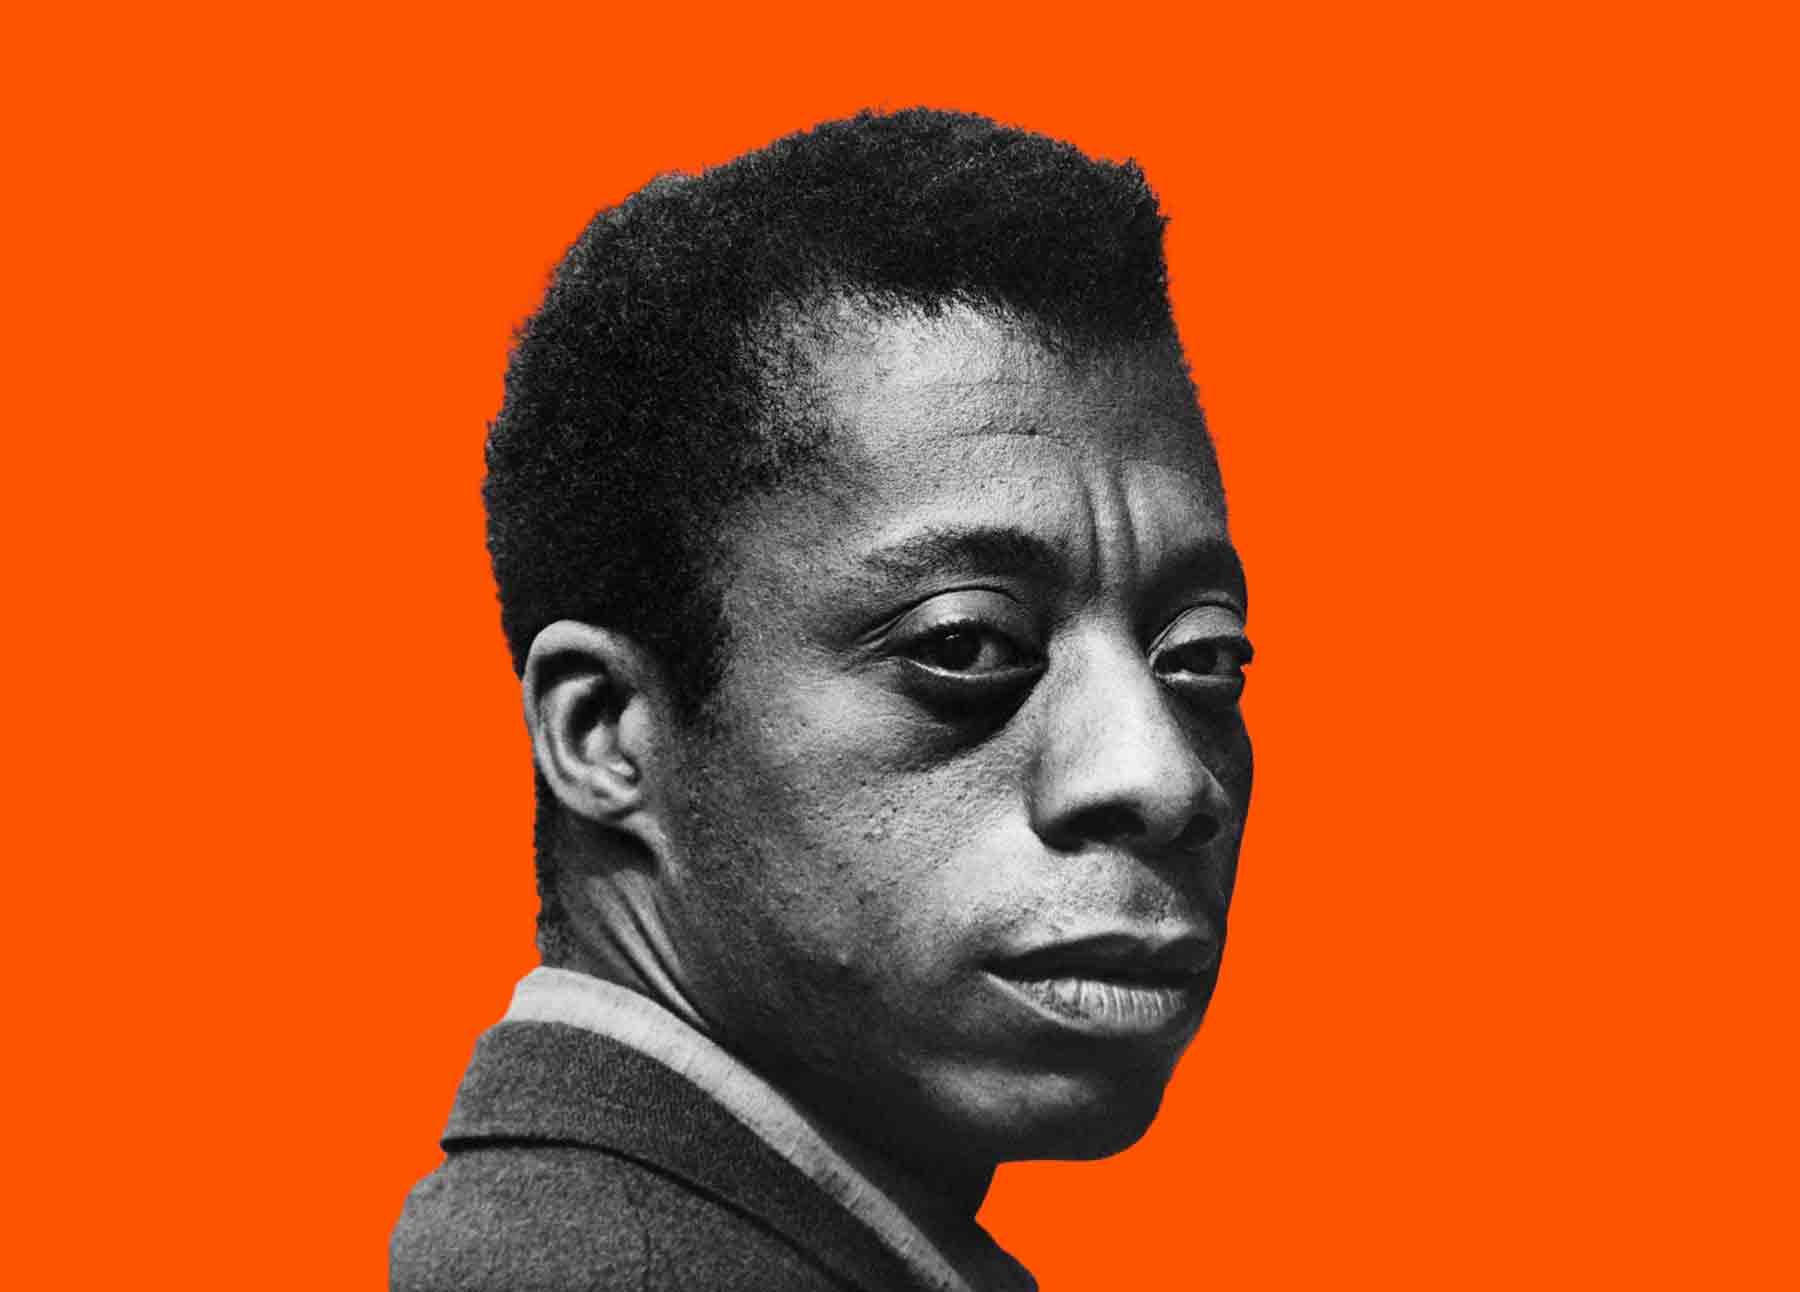 A Black male looks solemnly into the camera (black and white image). The figure is cutout against a solid orange background. 